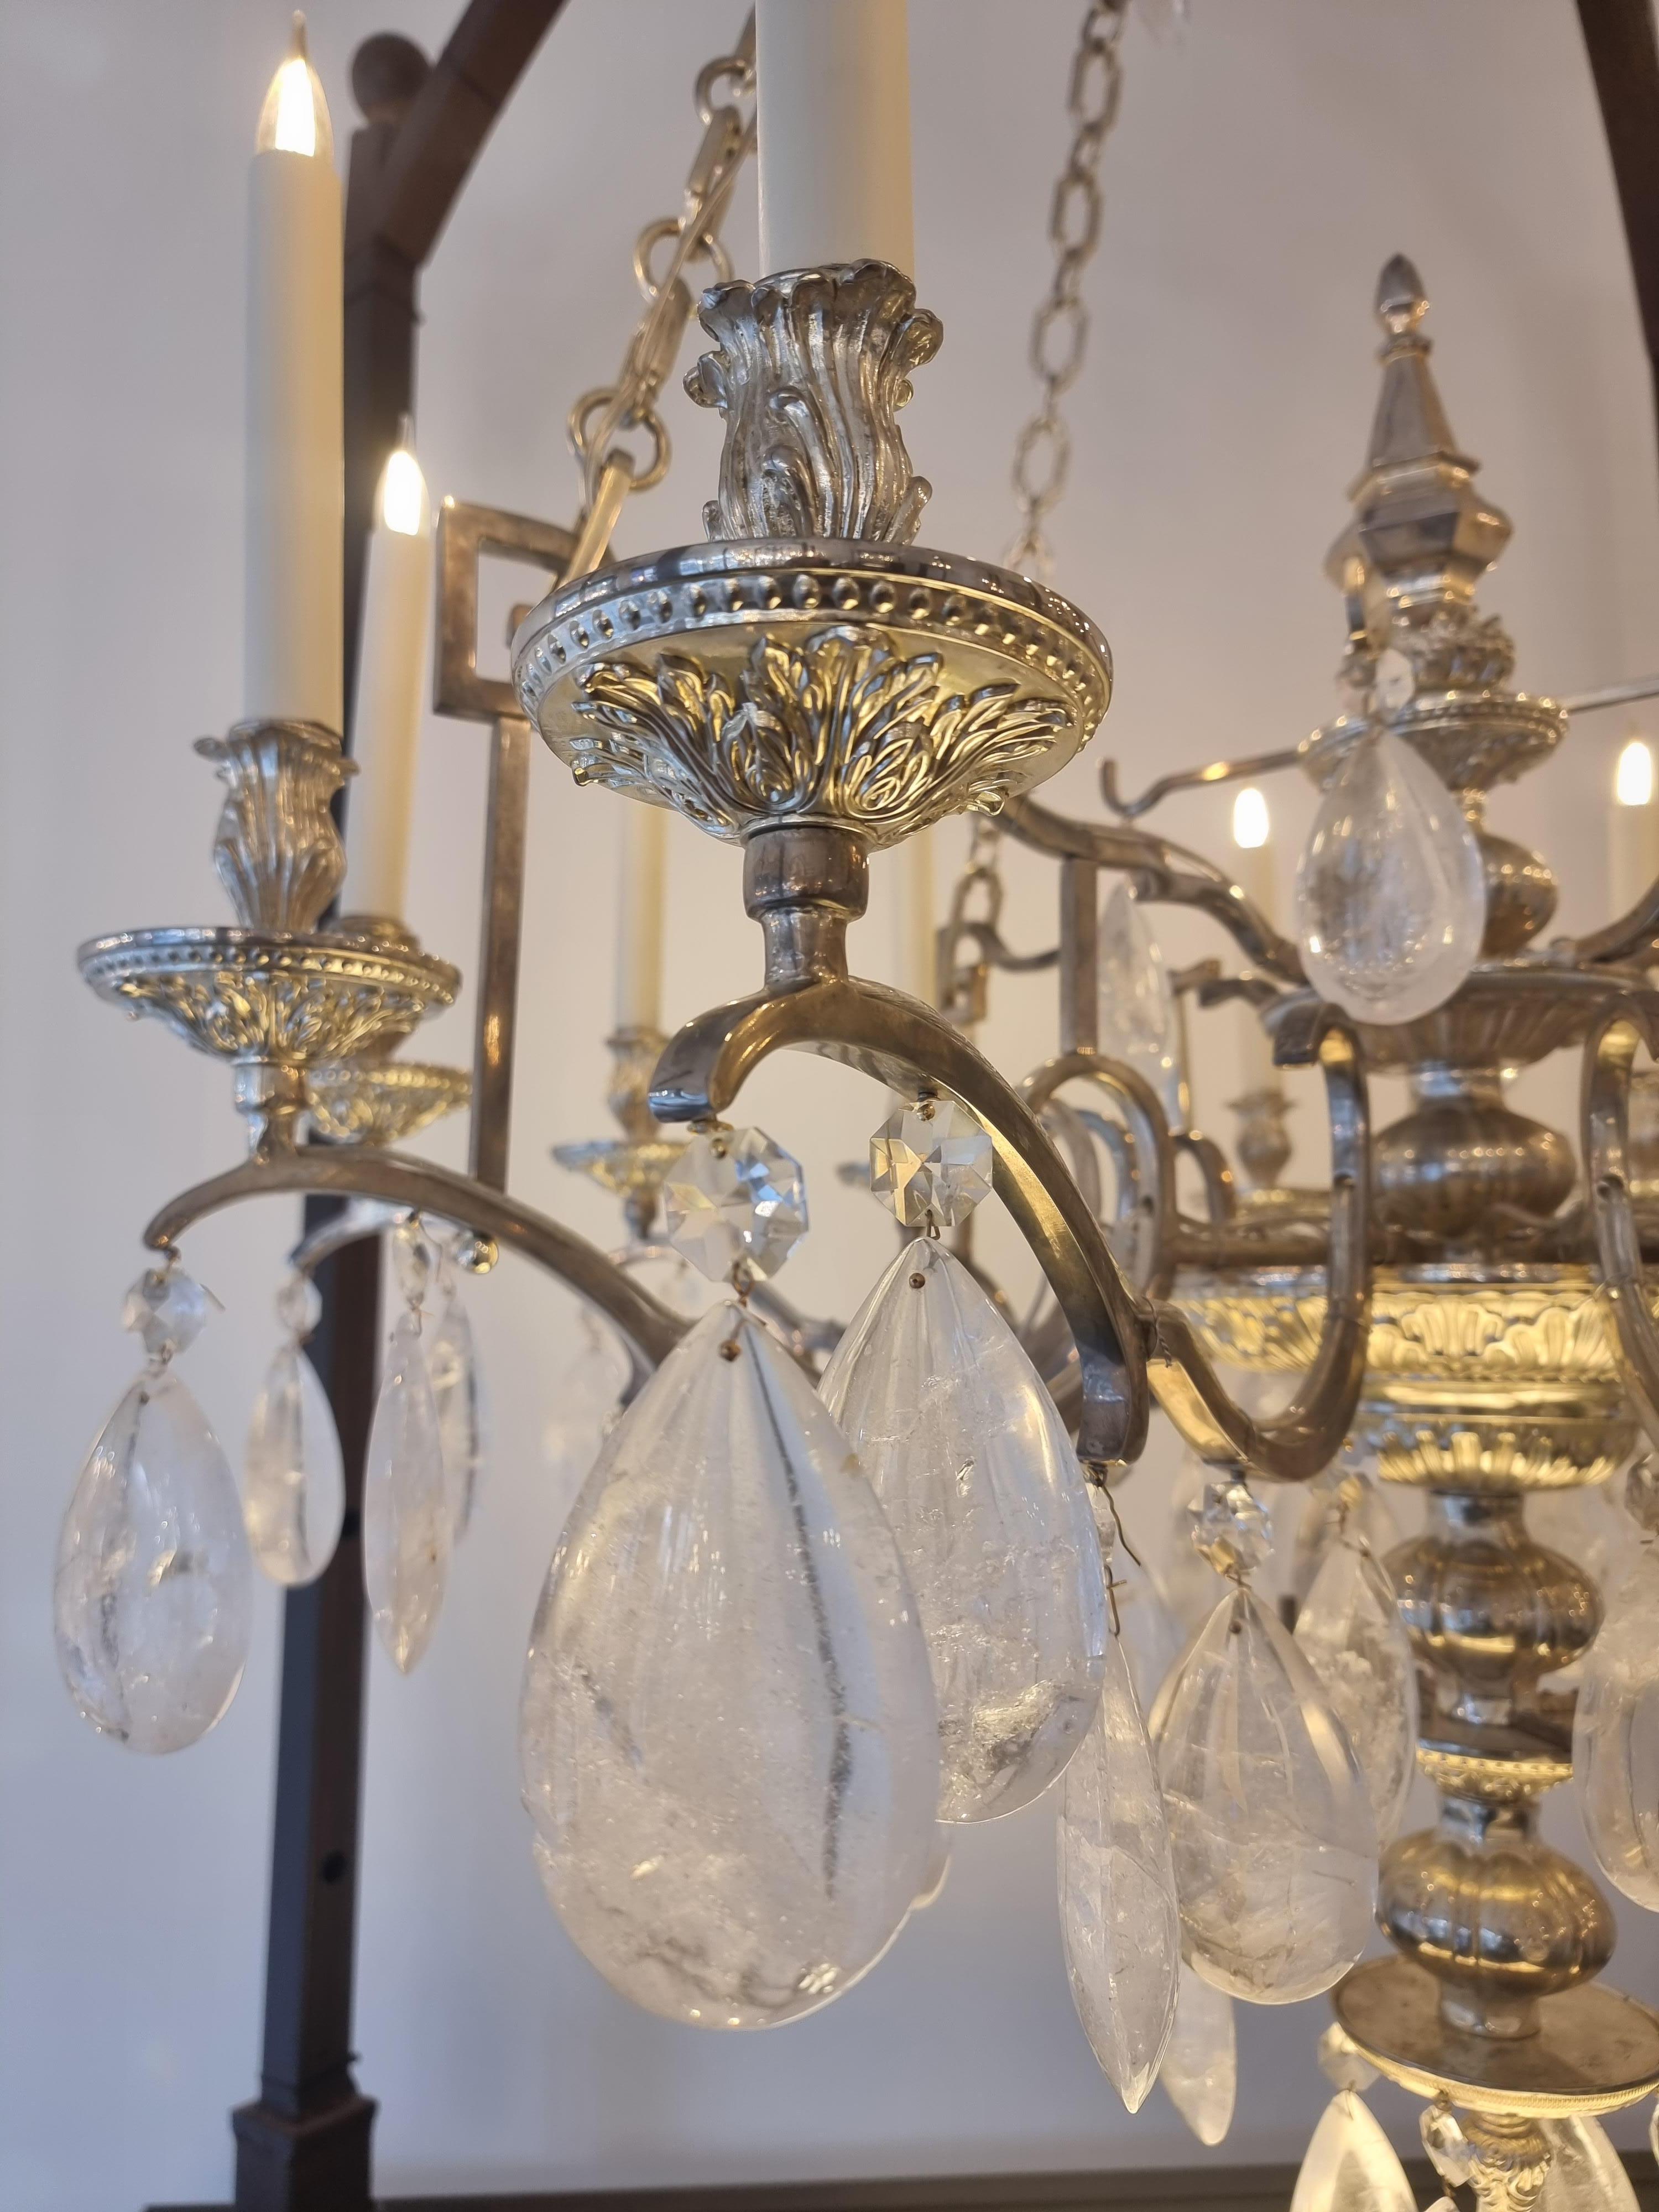 This chandelier is an original variation of the chain models that could be found in the 18th century, such as the Louis XVI period torchiere chandelier in the Château de Versailles.
On a central openwork bowl surmounted by a metal dagger, twelve